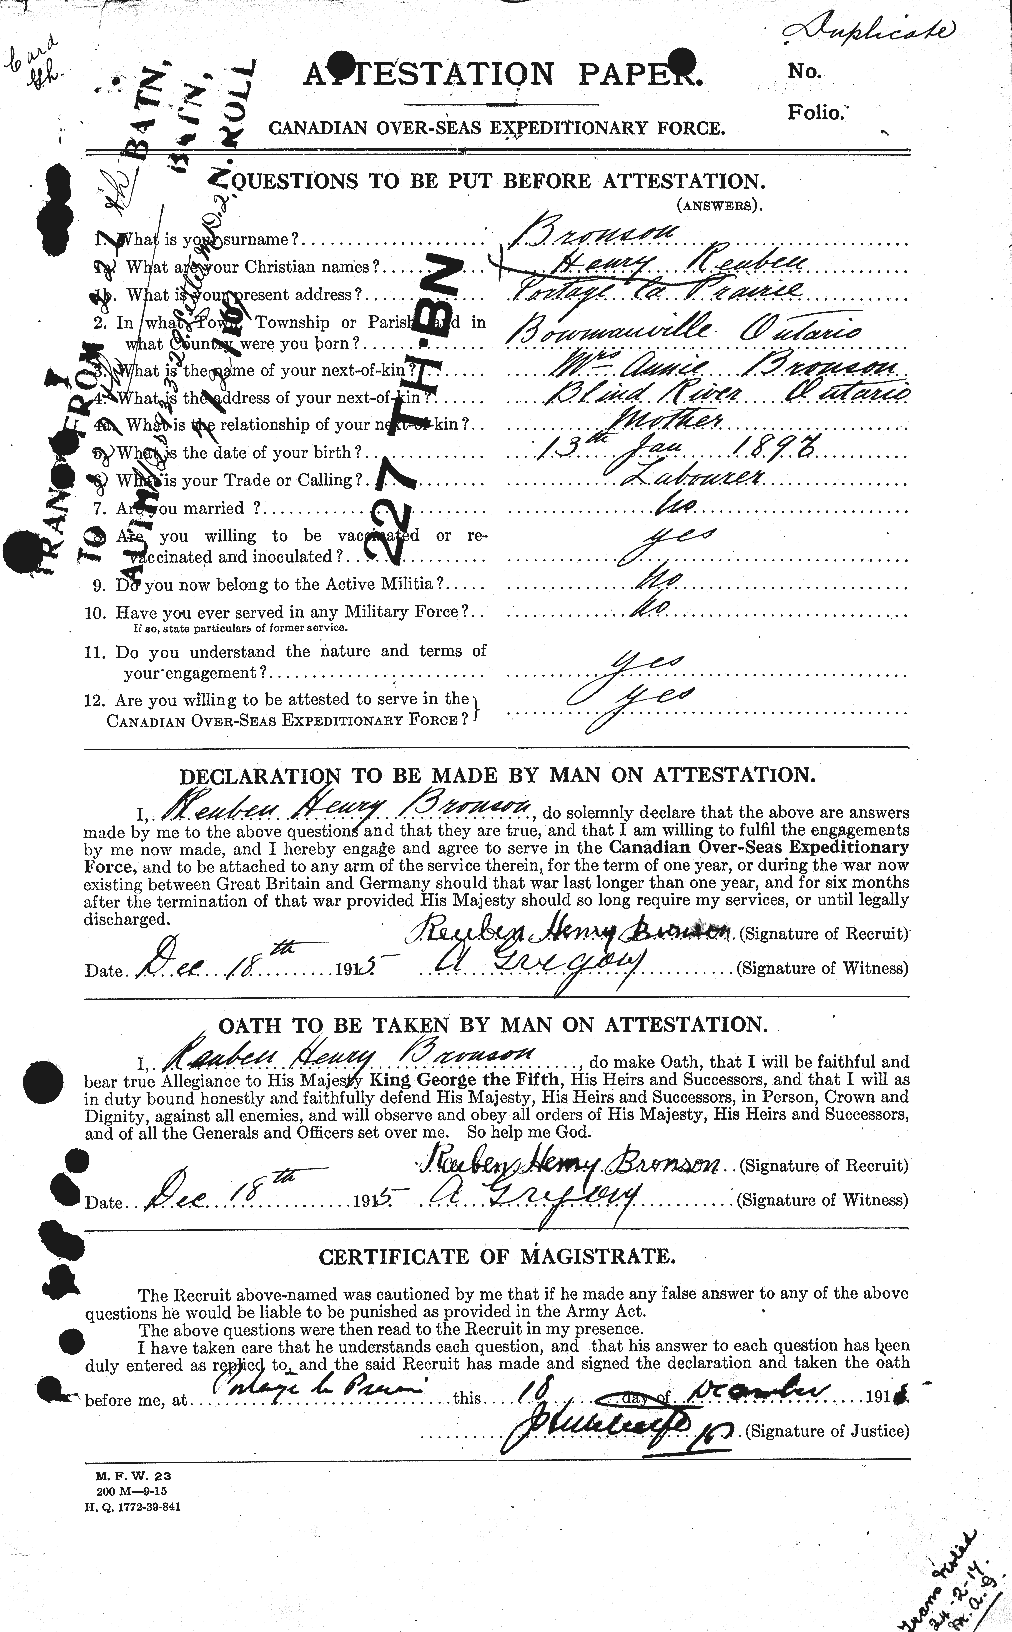 Personnel Records of the First World War - CEF 262226a